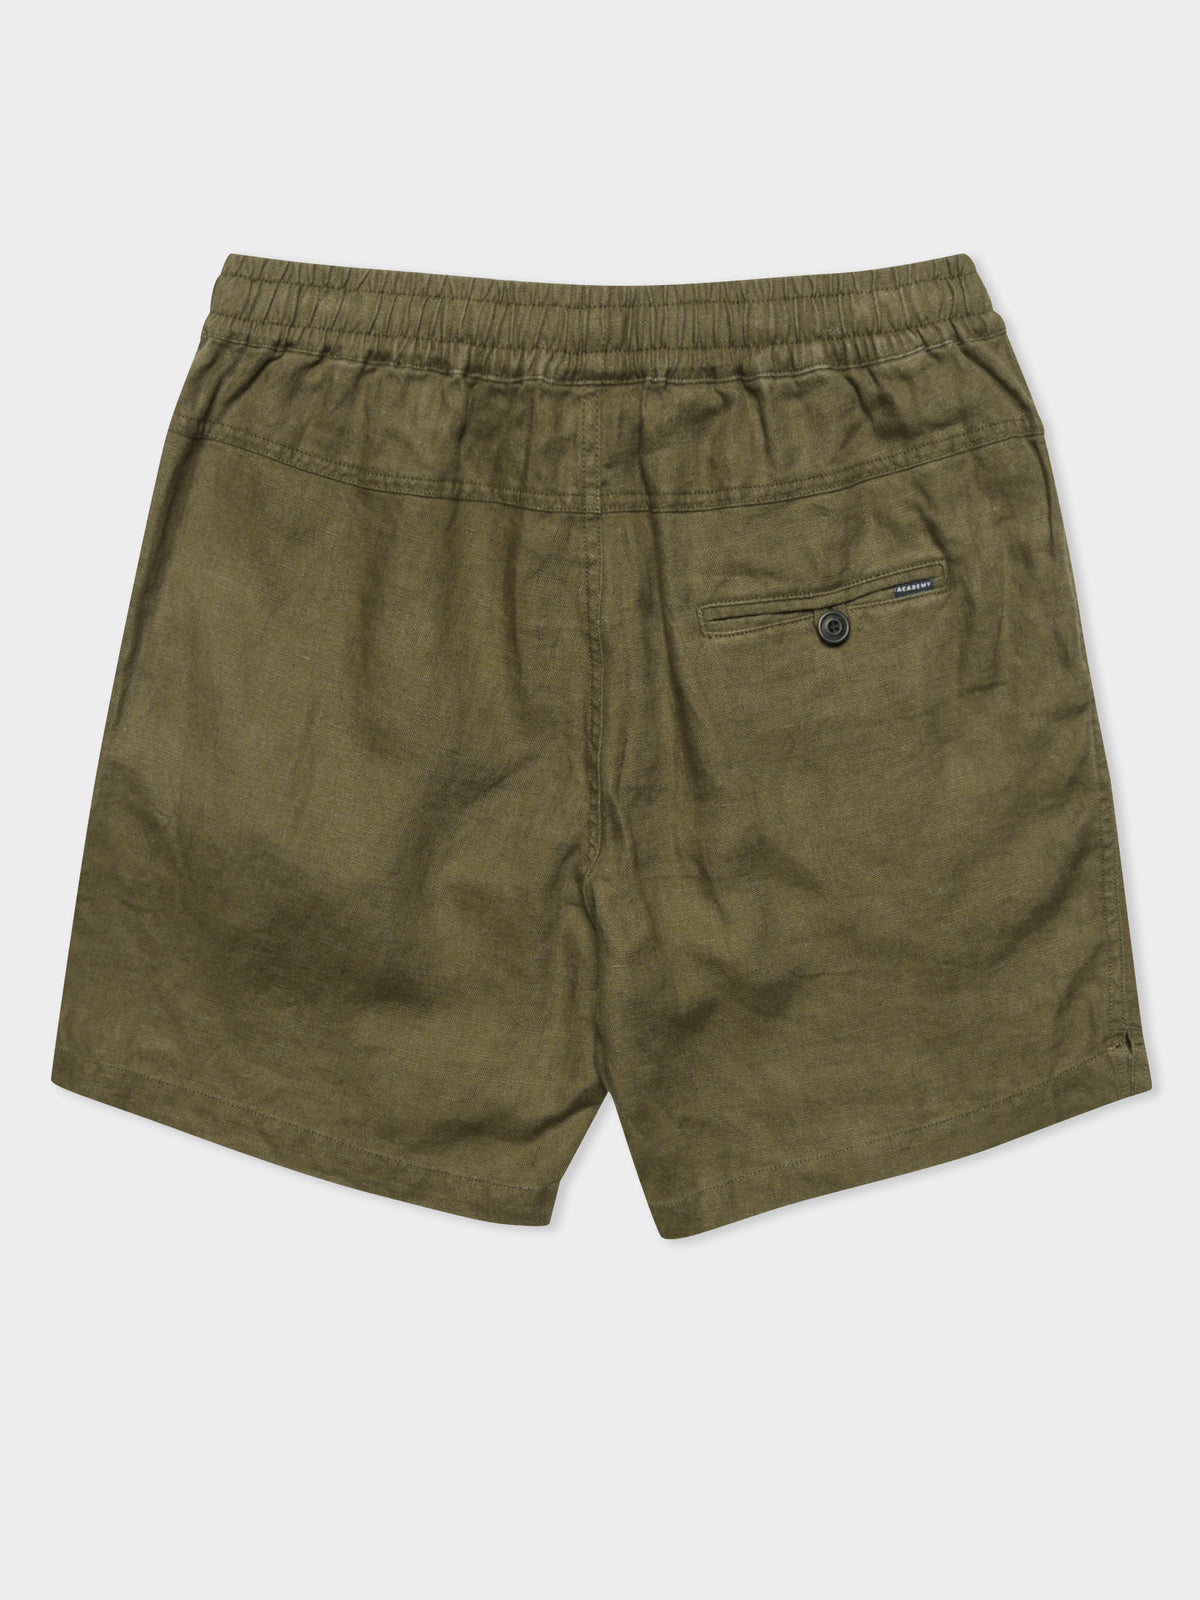 Riviera Linen Shorts in Olive